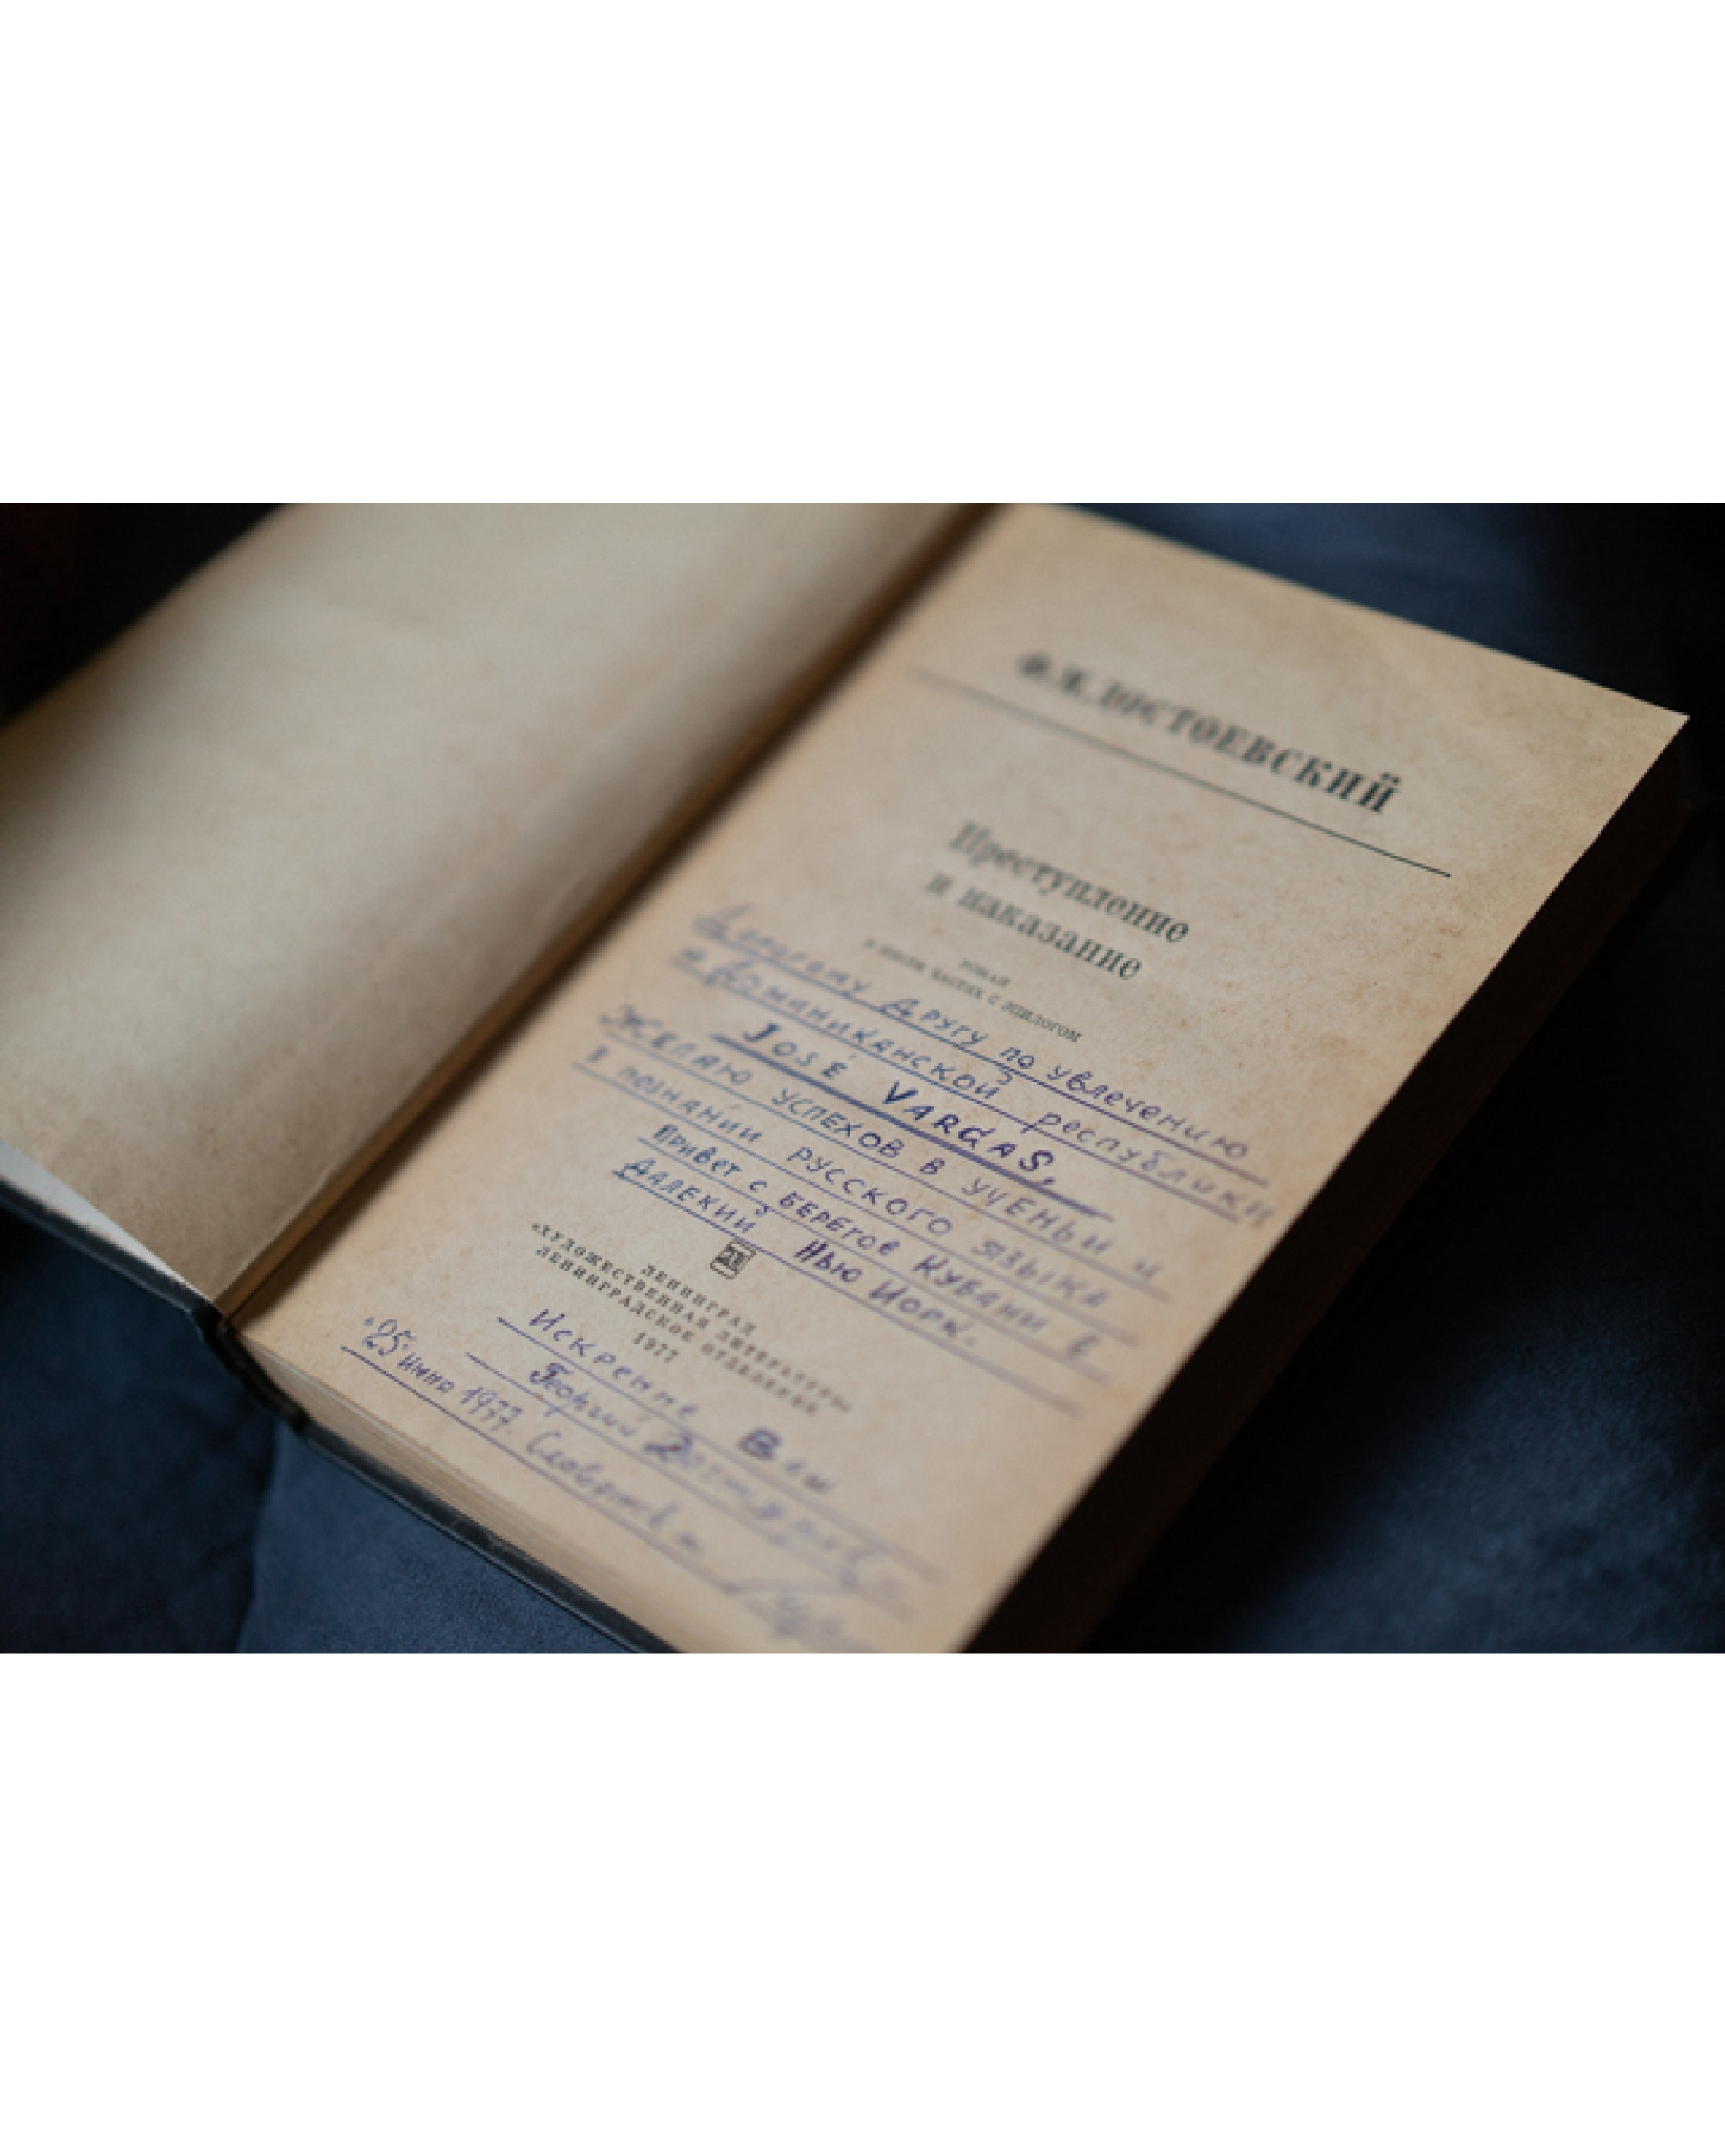 One of numerous books sent to Caba from the USSR while in the Dominican Republic.